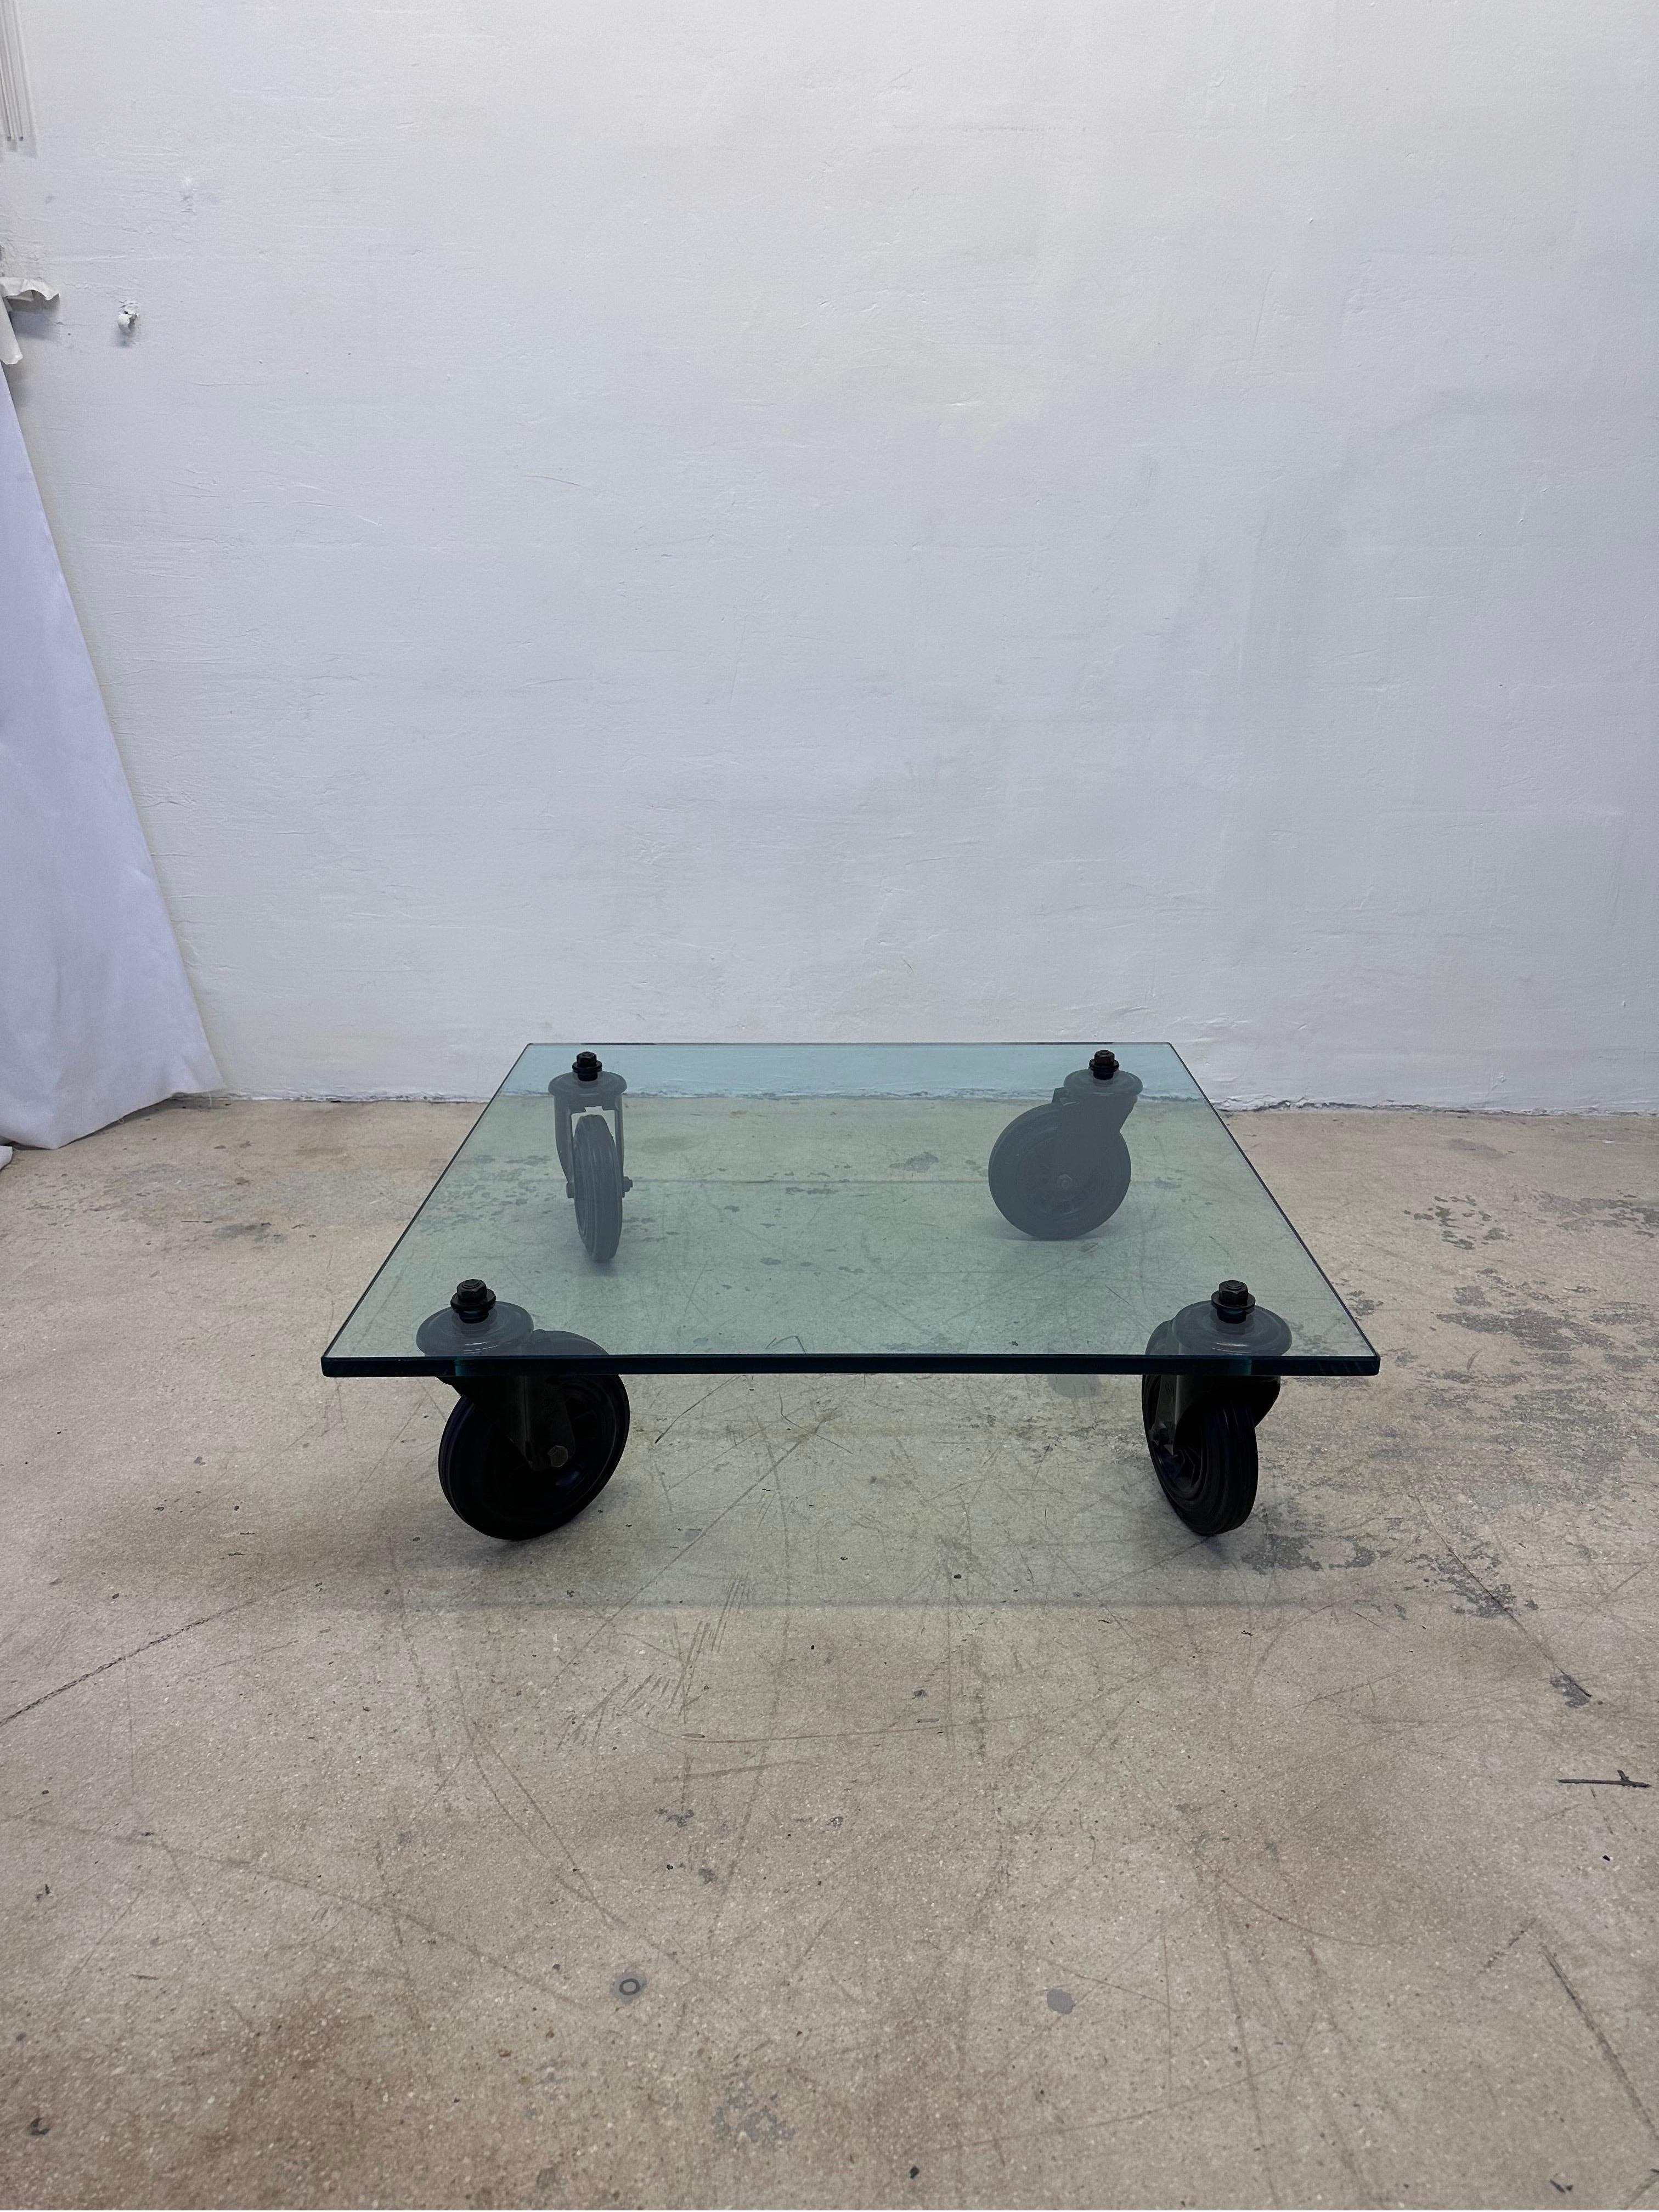 Designed by Gae Aulenti, this low coffee table consists of a tempered glass top supported by four black industrial wheels and was produced by Fontana Arte and imported by Luminaire.

An Industrial trolley used at the Fontana Arte plant to transport